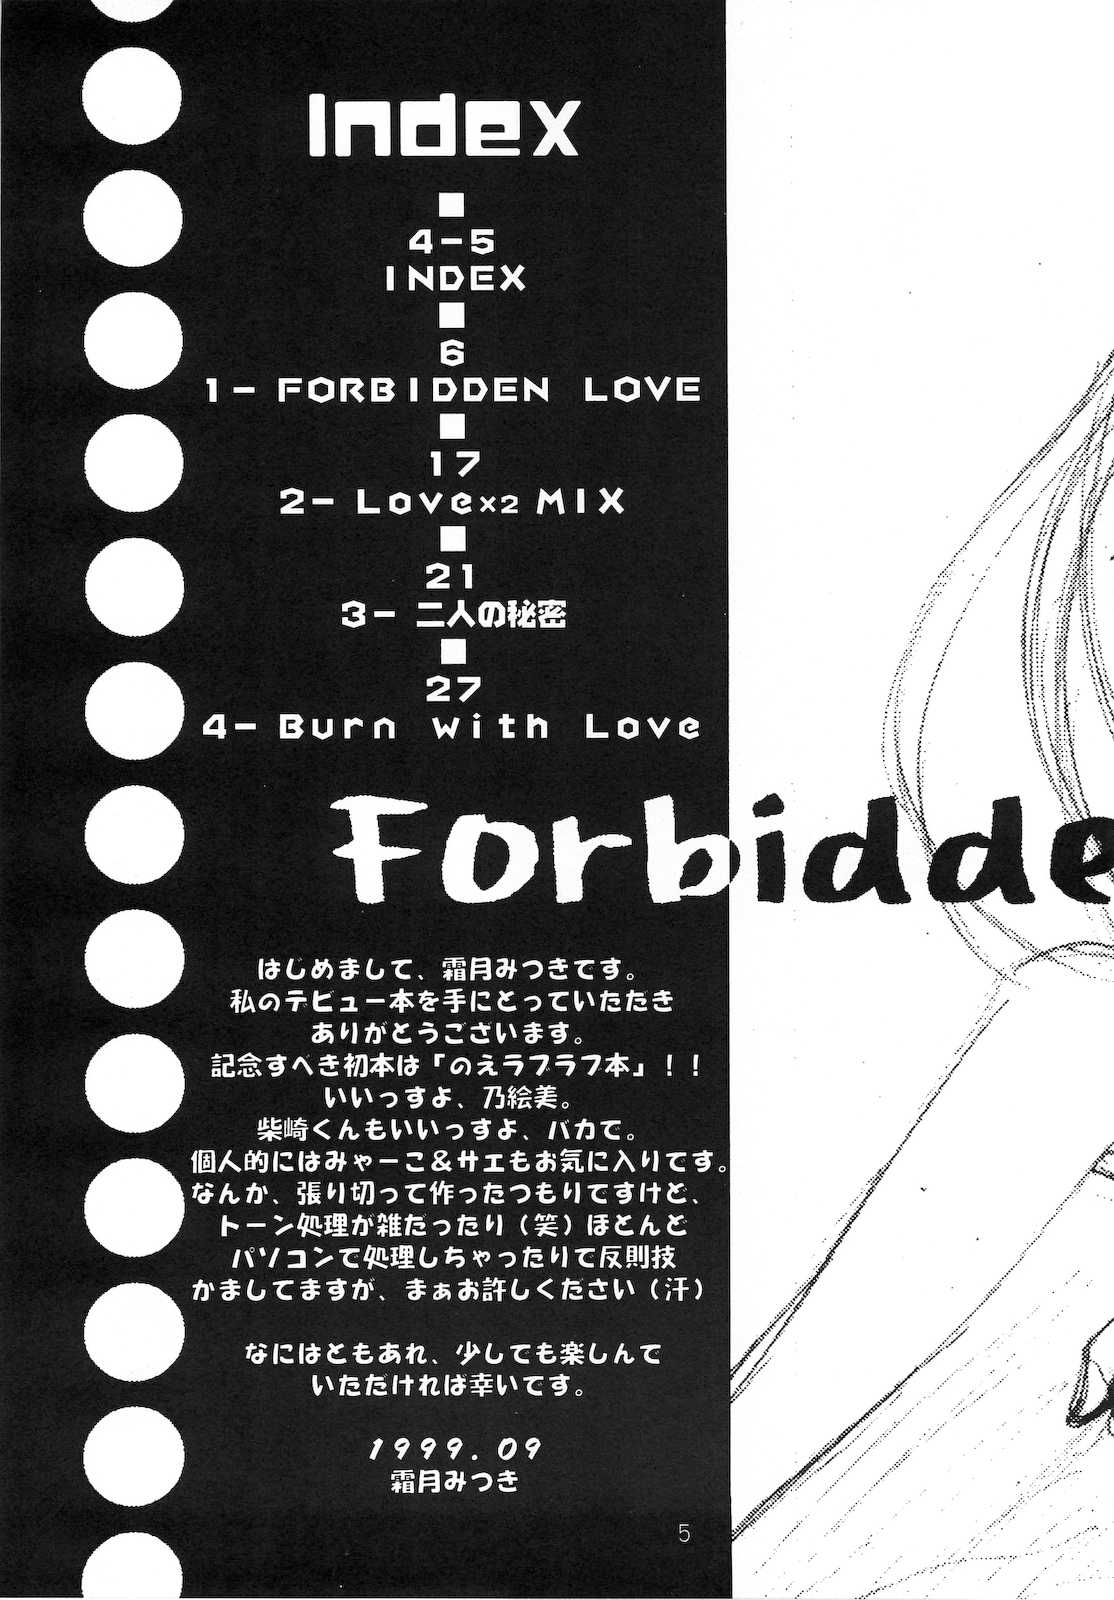 [Genei Humanoid as VeryBerry] Forbidden Love (With You) [幻影ヒューマノイド as VeryBerry] Forbidden Love (With You)